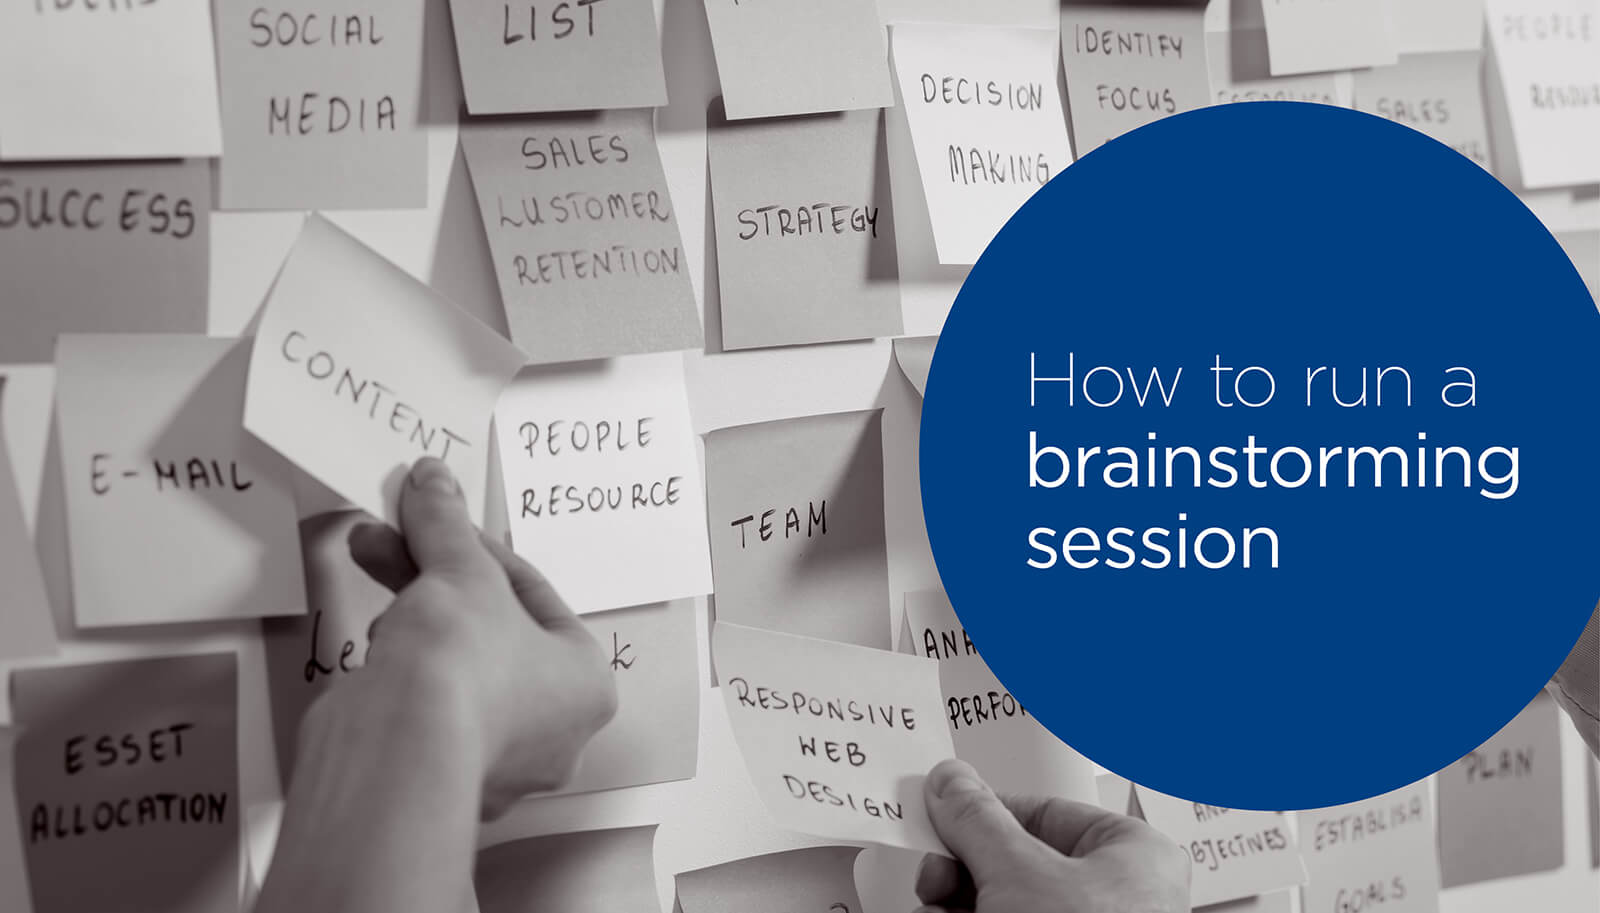 Ideas have value: How to run a Brainstorming Session for Marketing and Sales teams